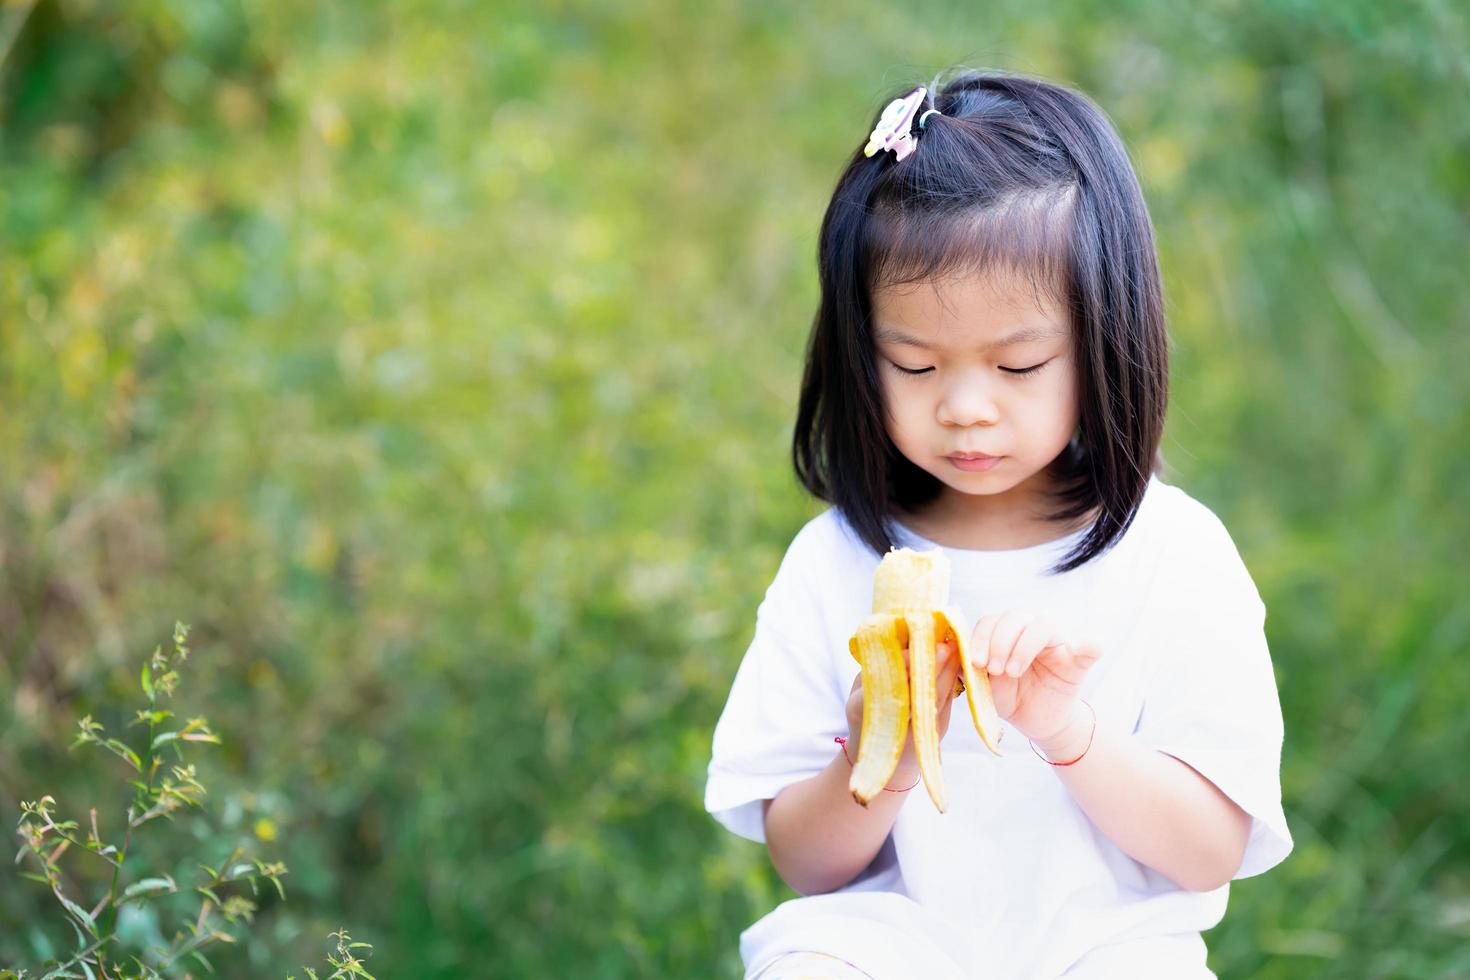 Cute girl is peeling delicious banana she holds in her hand. Green nature background. photo